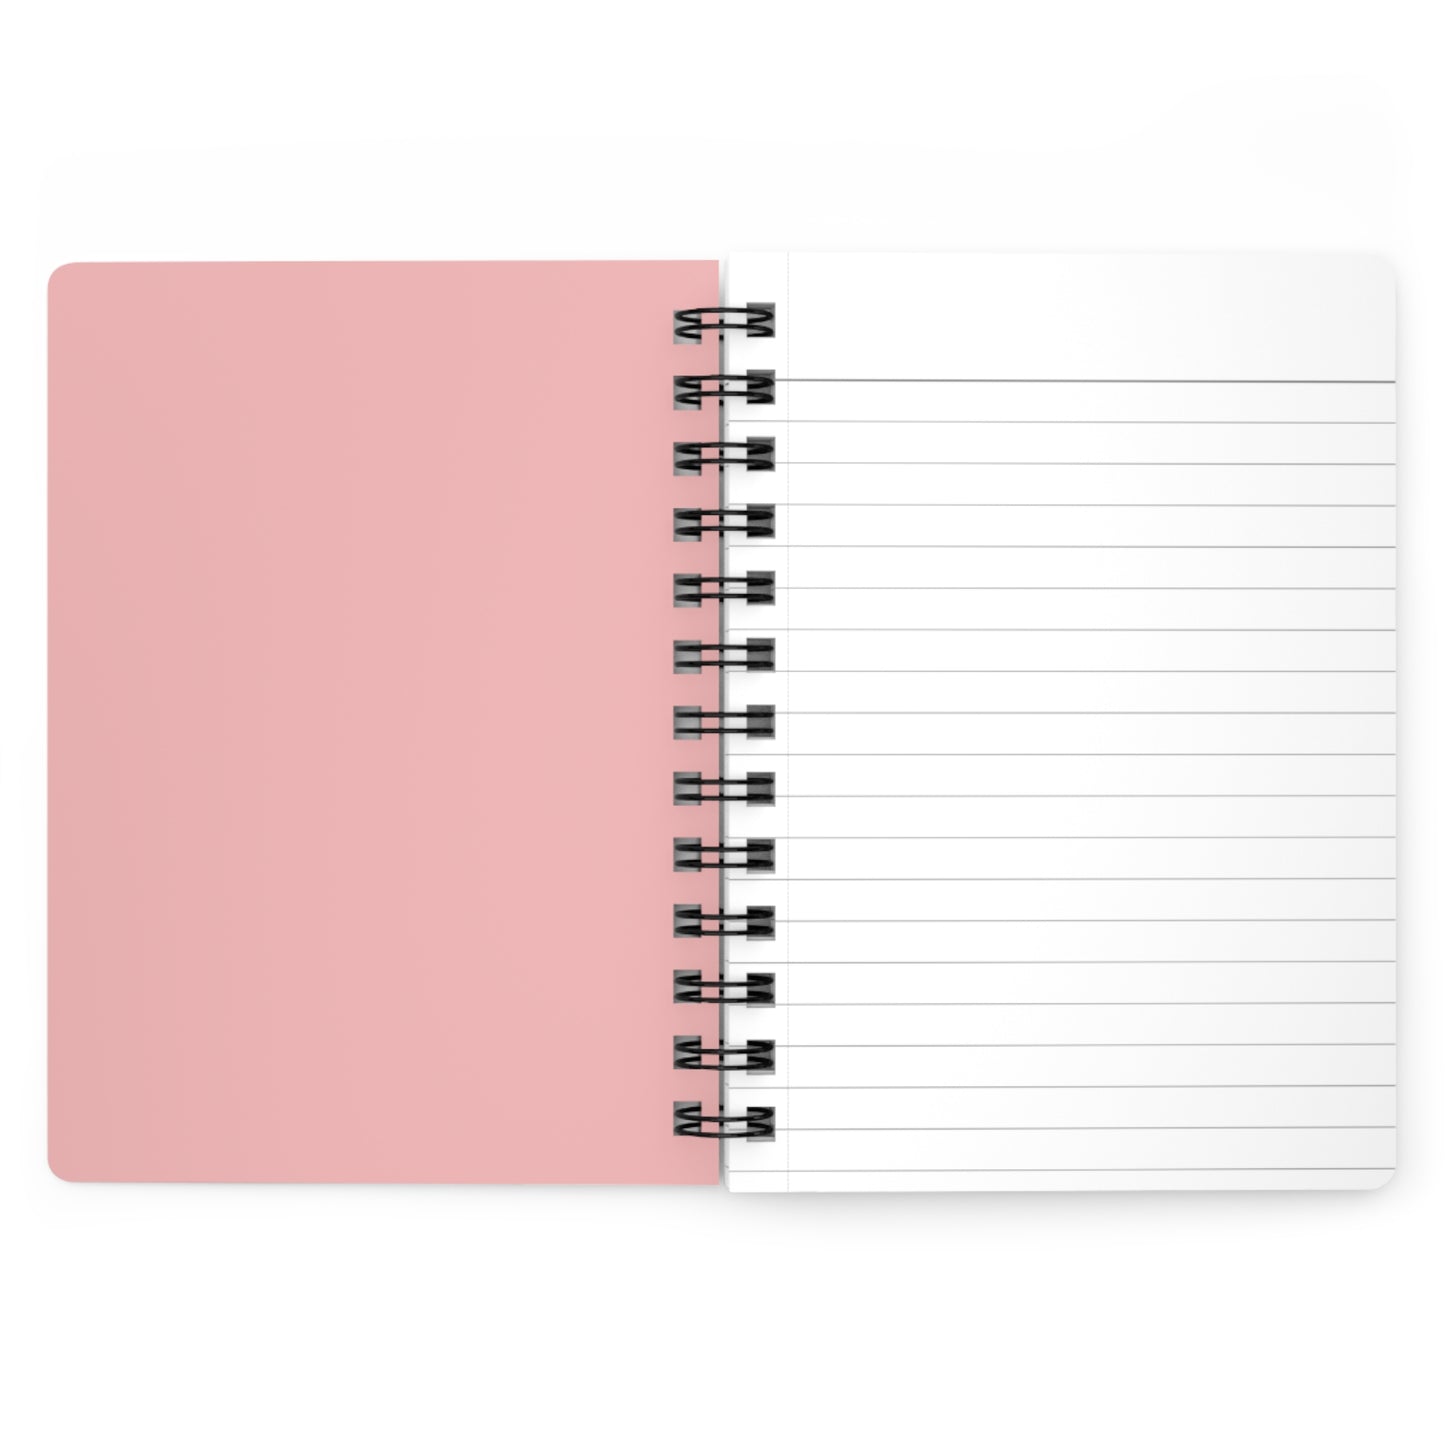 WTF Is My Password Journal - Spiral Bound Journal for Remembering Shit, Write Your Shit Down, Notebook For Forgetfulness